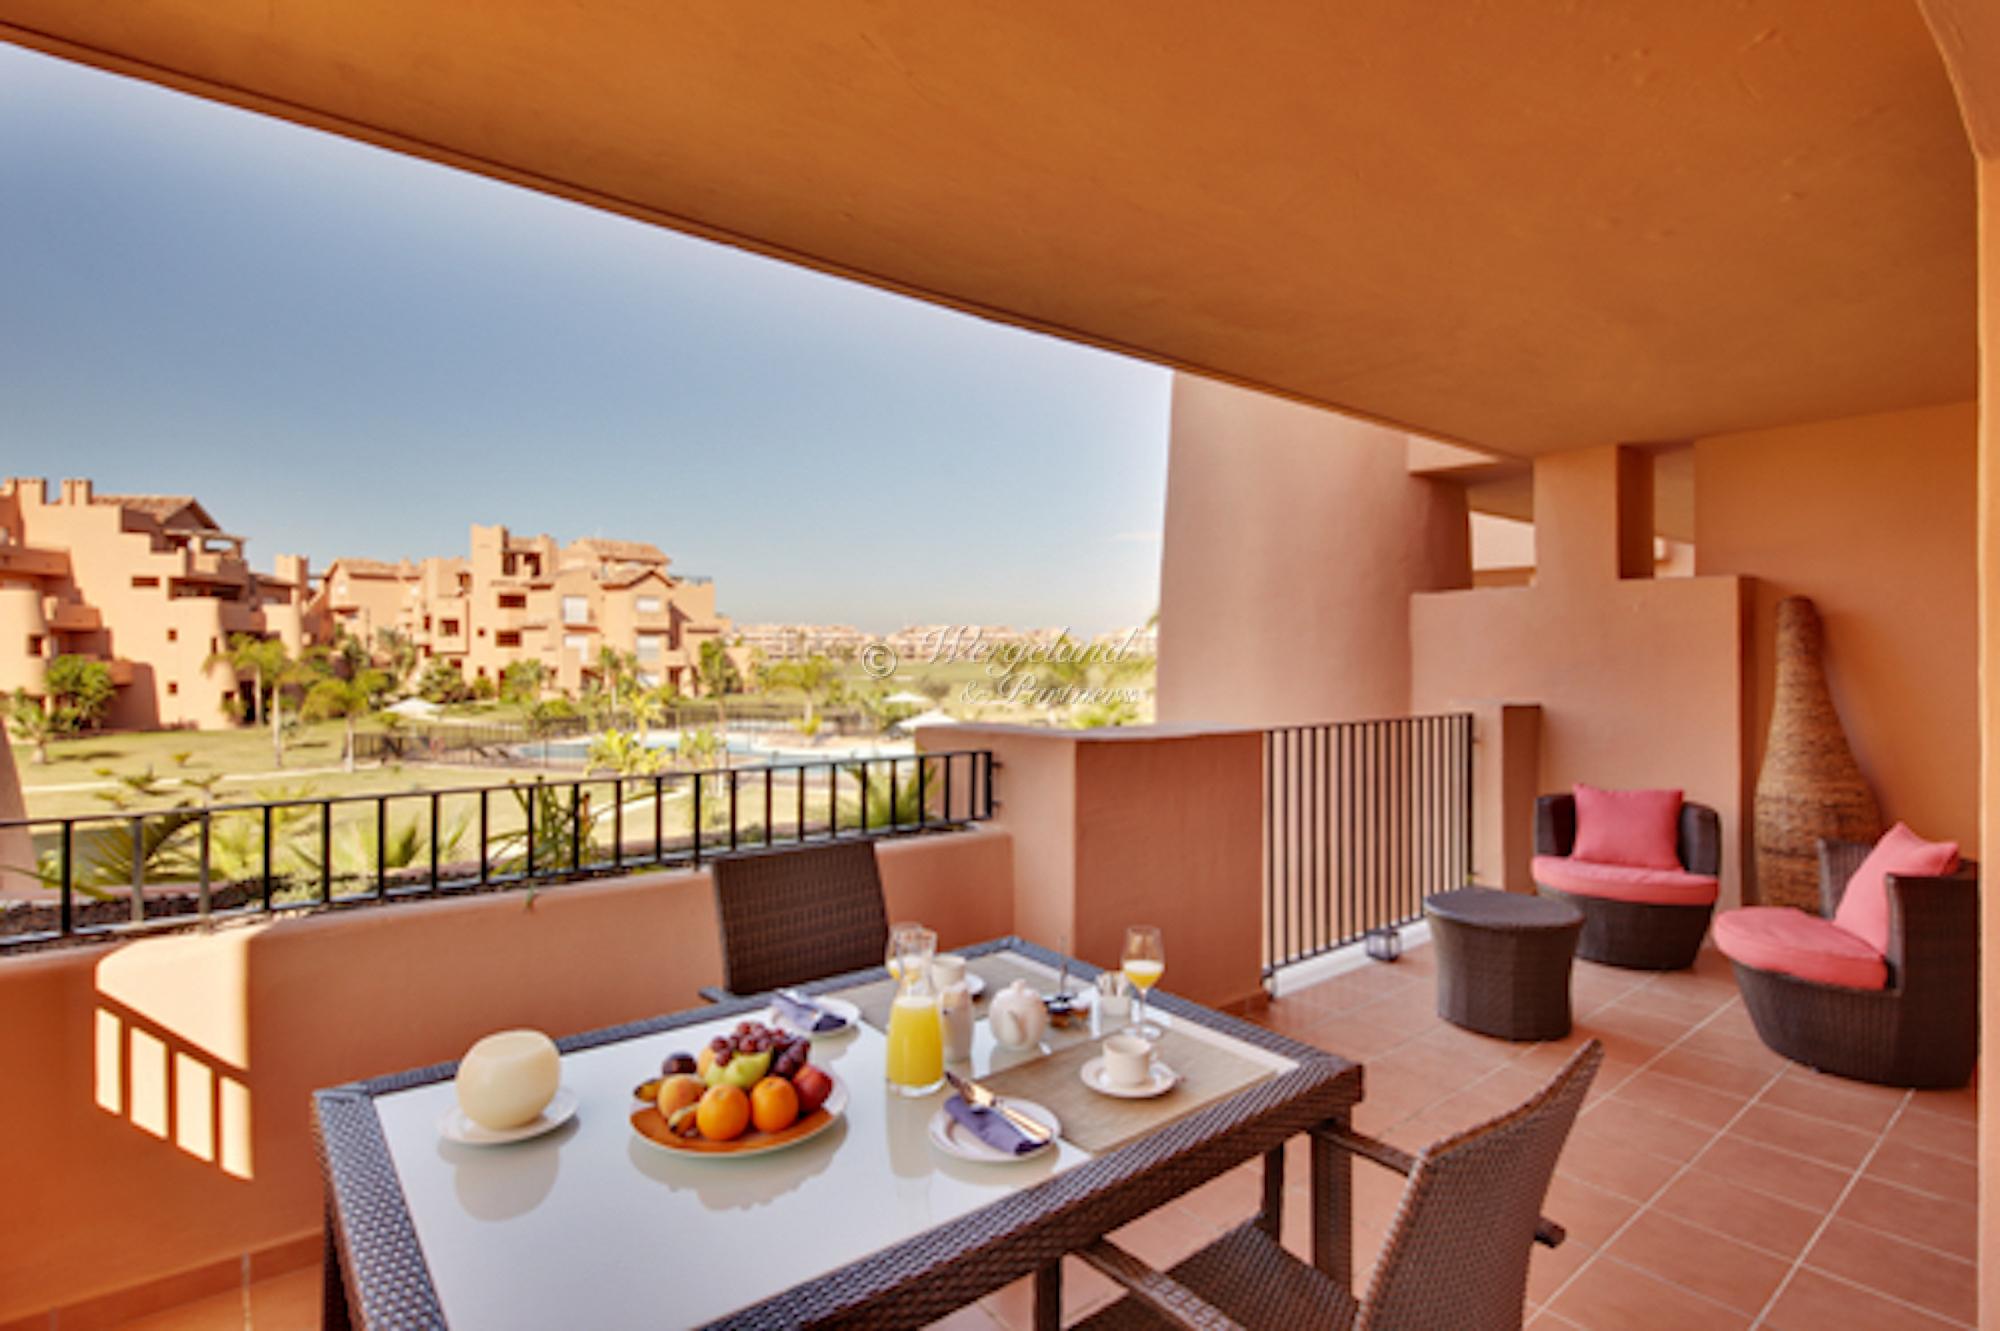 2 bed/2 bath west facing furnished golf apartment, pool/golf view [10712]